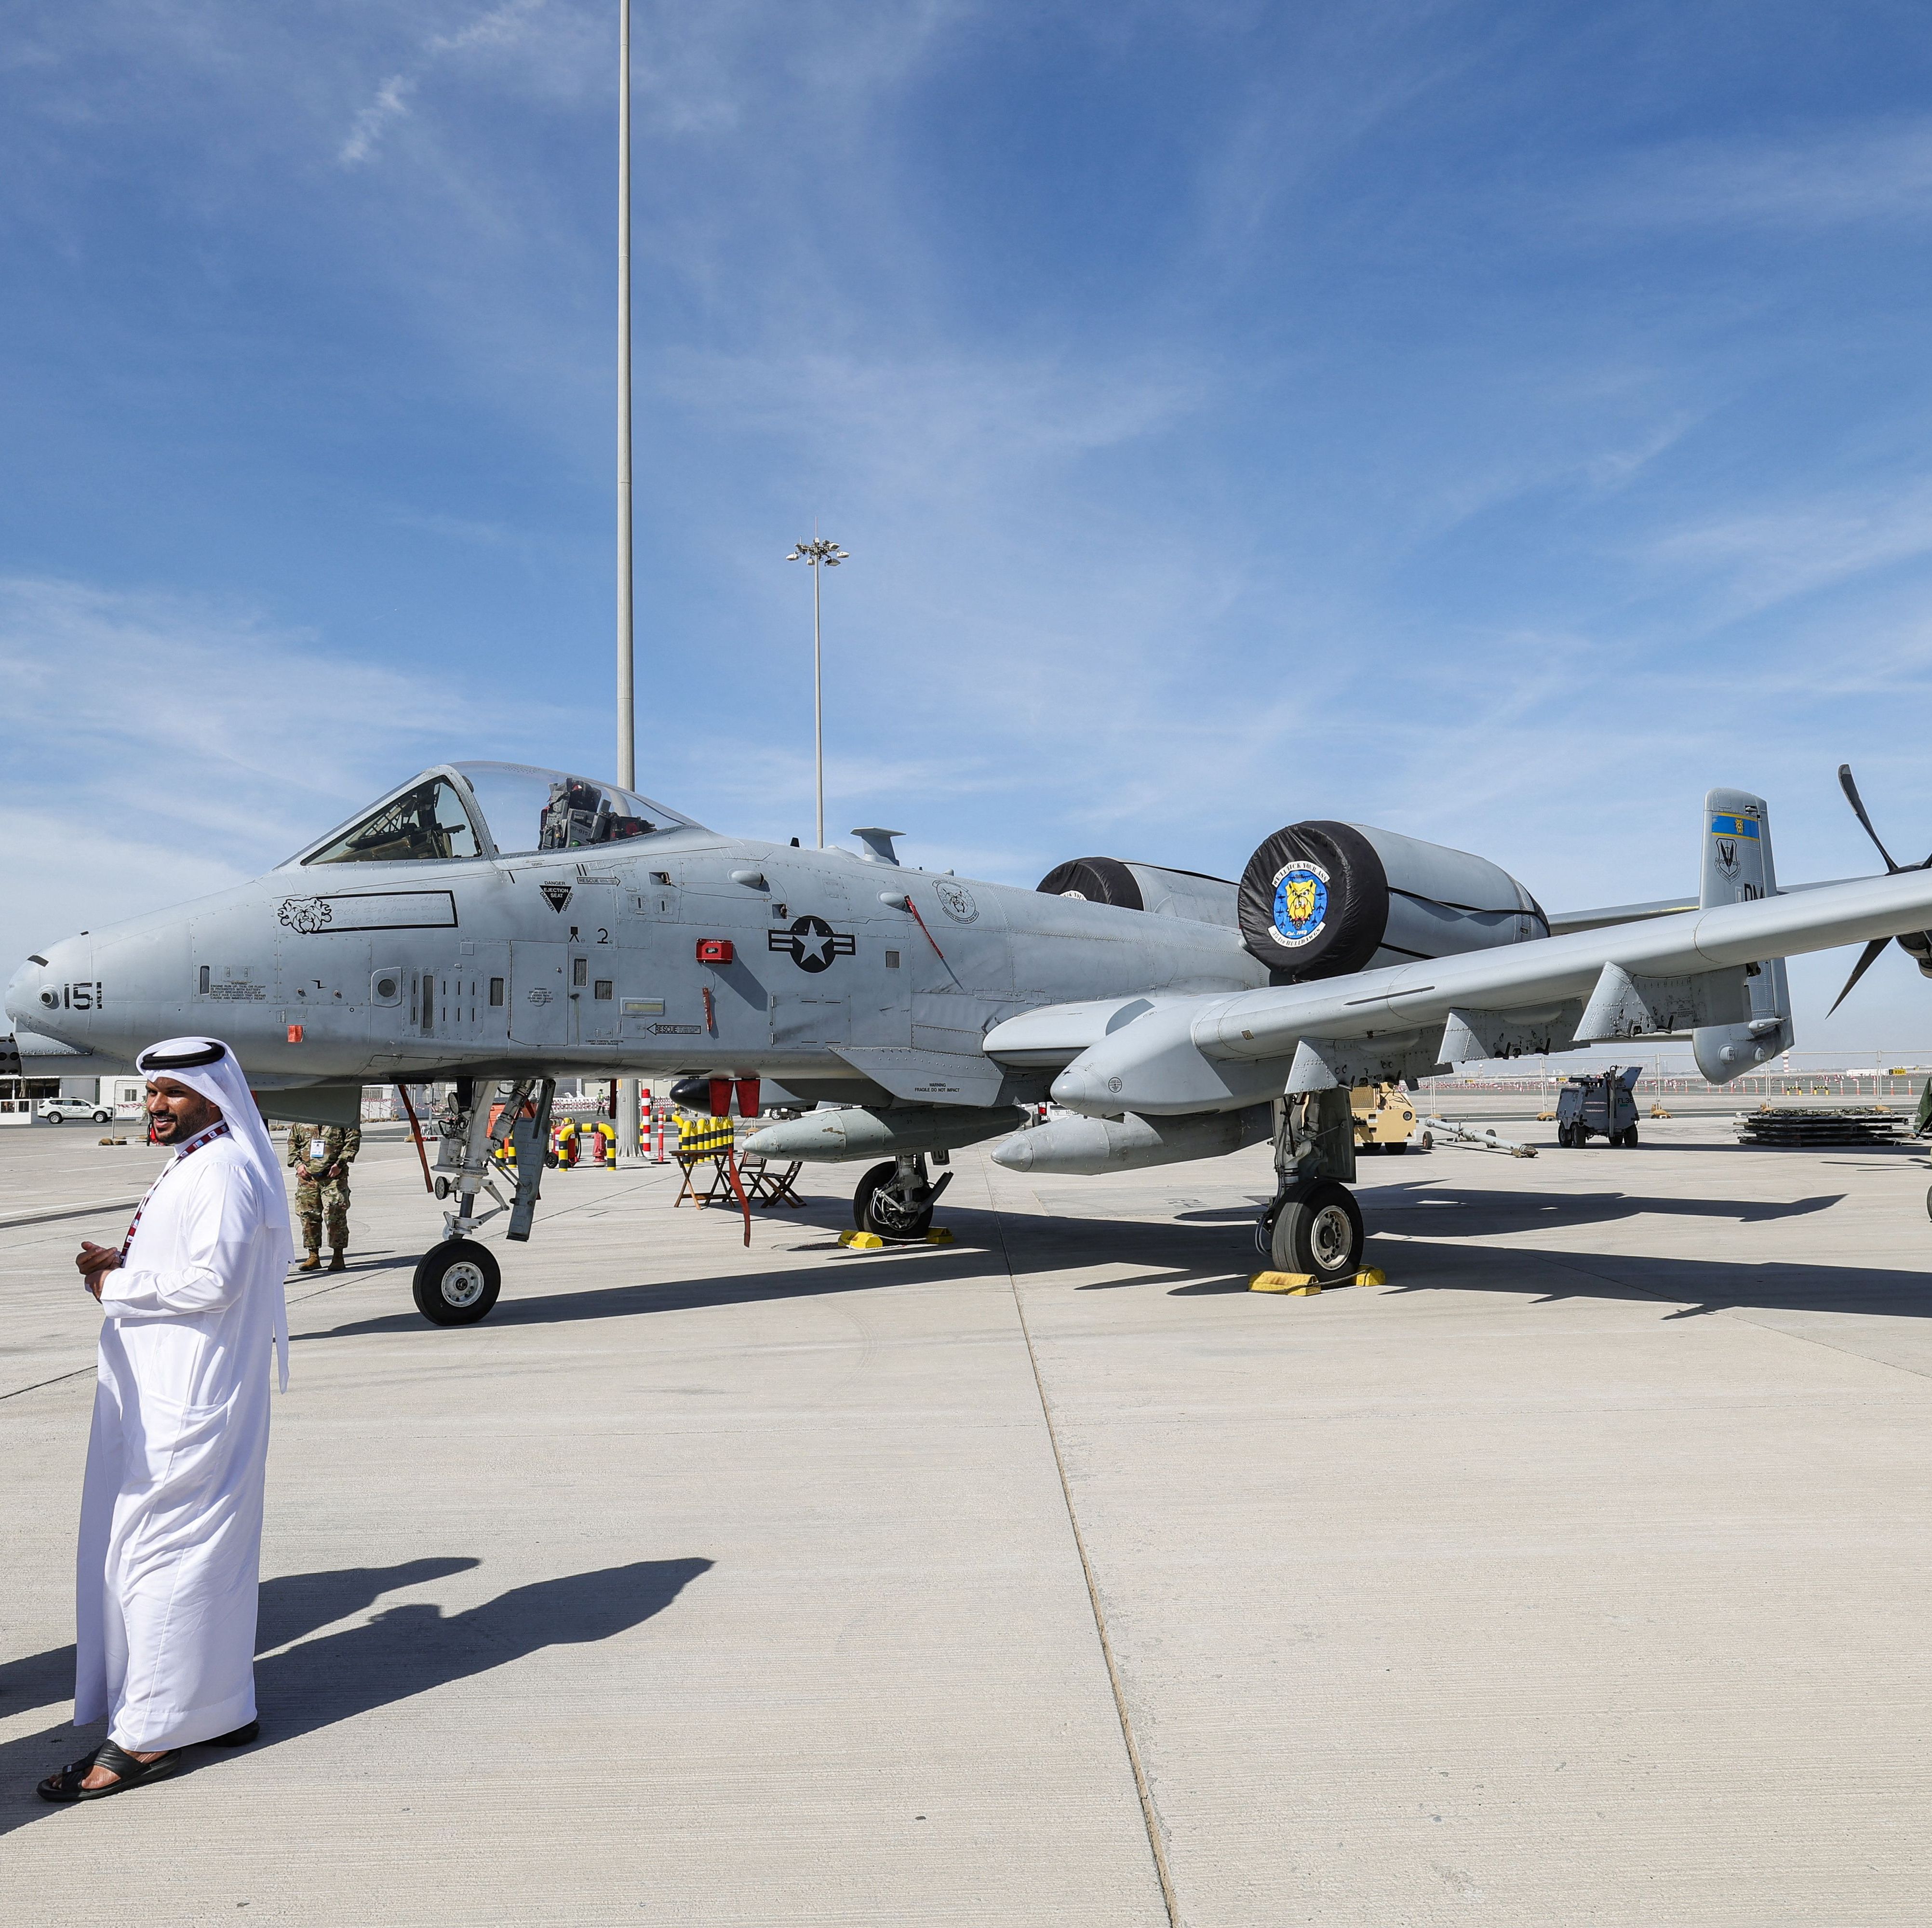 A Mystery Country Is Trying to Snatch Up America's Extra A-10 Warthogs